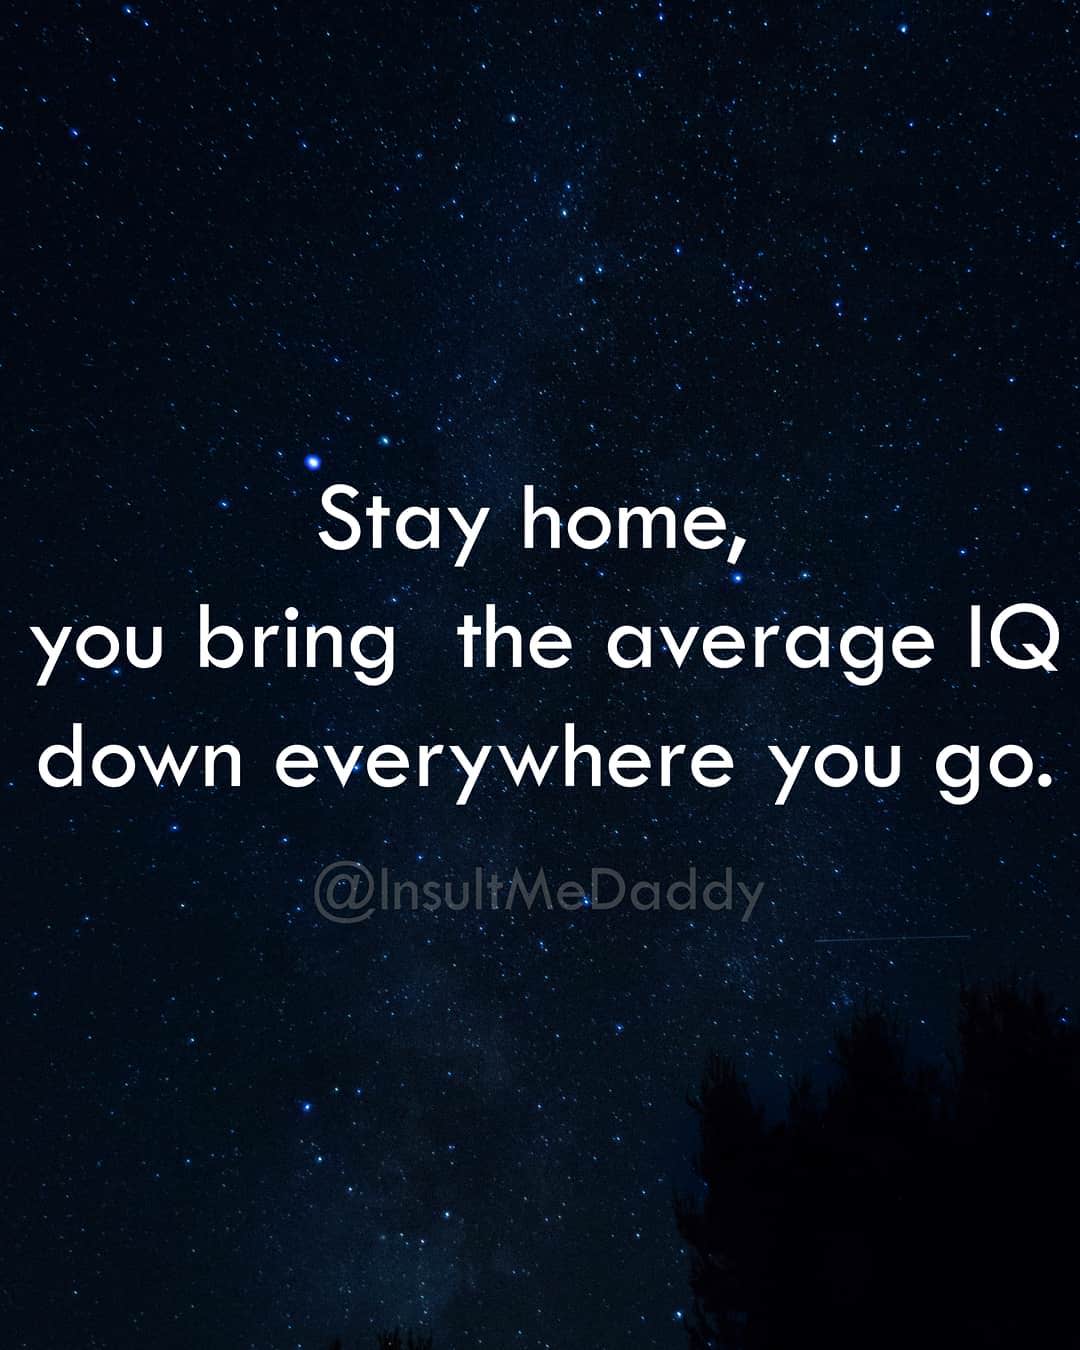 secret life of bees quotes - Stay home, you bring the average Iq down everywhere you go.